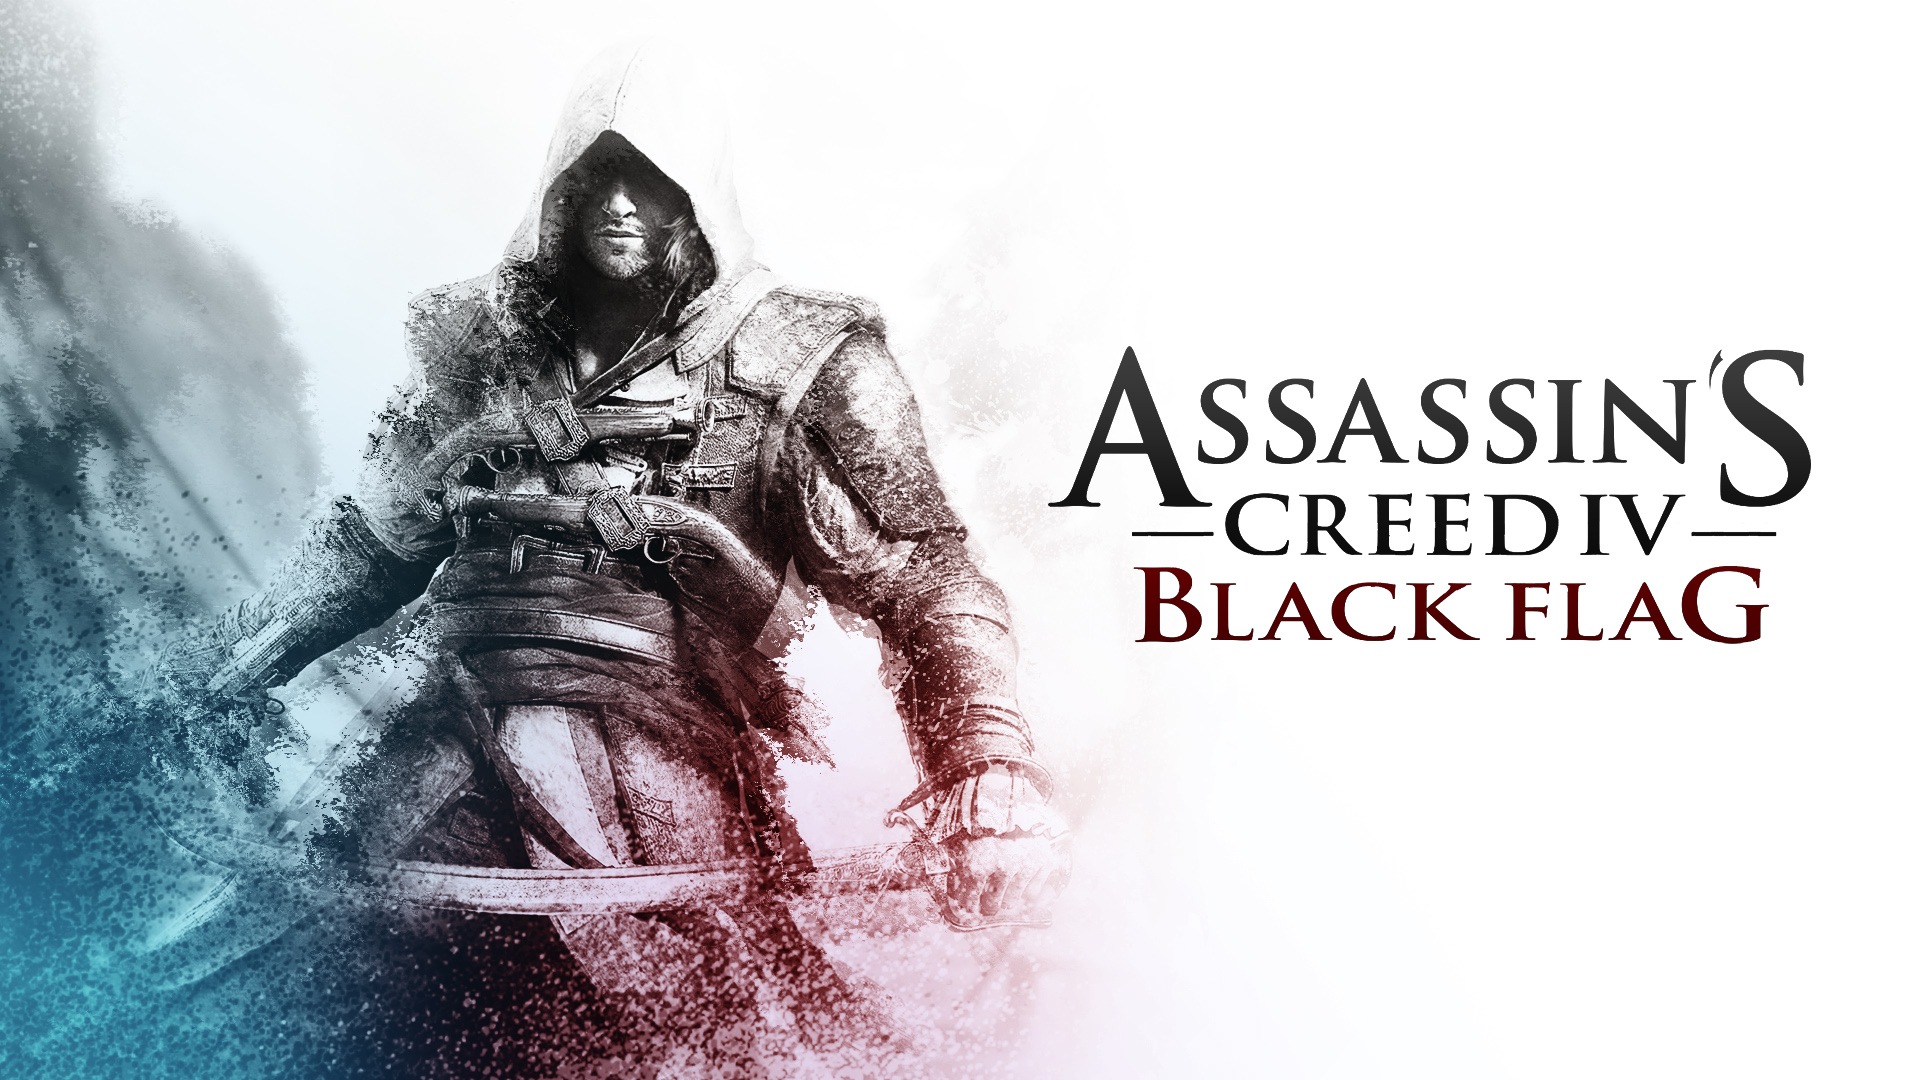 Creed IV Assassin: Black Flag HD wallpapers #16 - 1920x1080